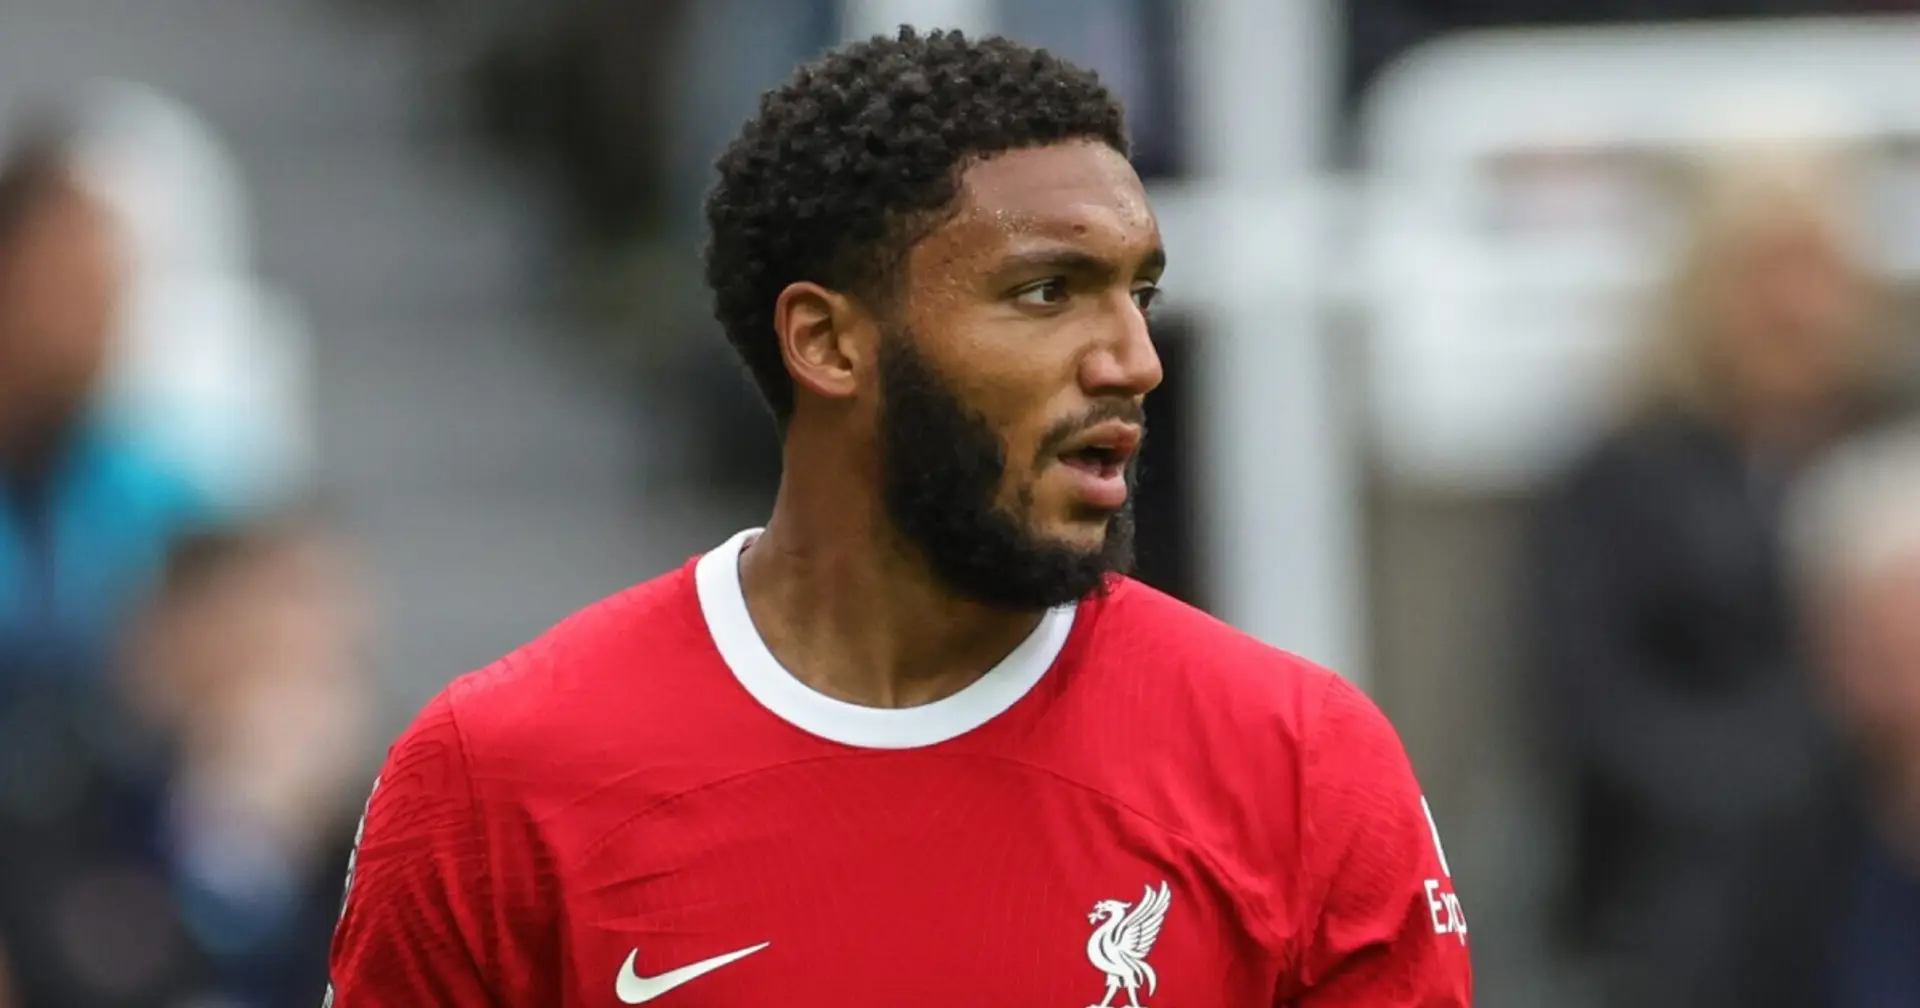 Tottenham reportedly interested in January move for Joe Gomez (reliability: 3 stars)